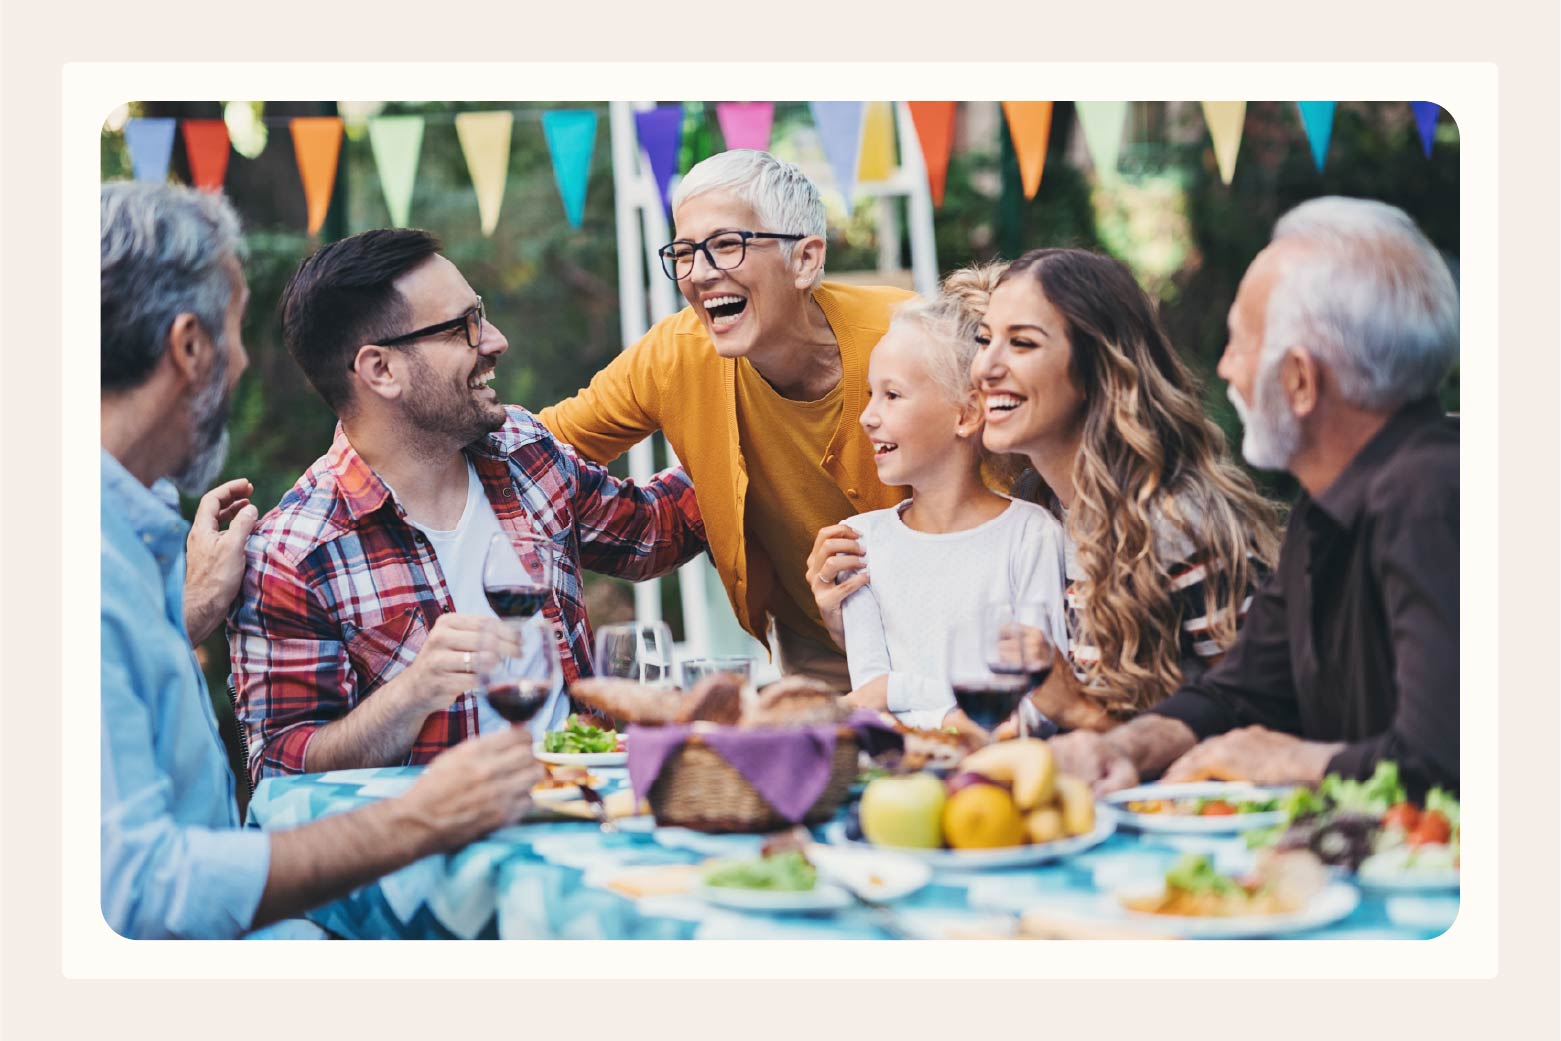 Colorful party table surrounded by three generations of a family celebrating